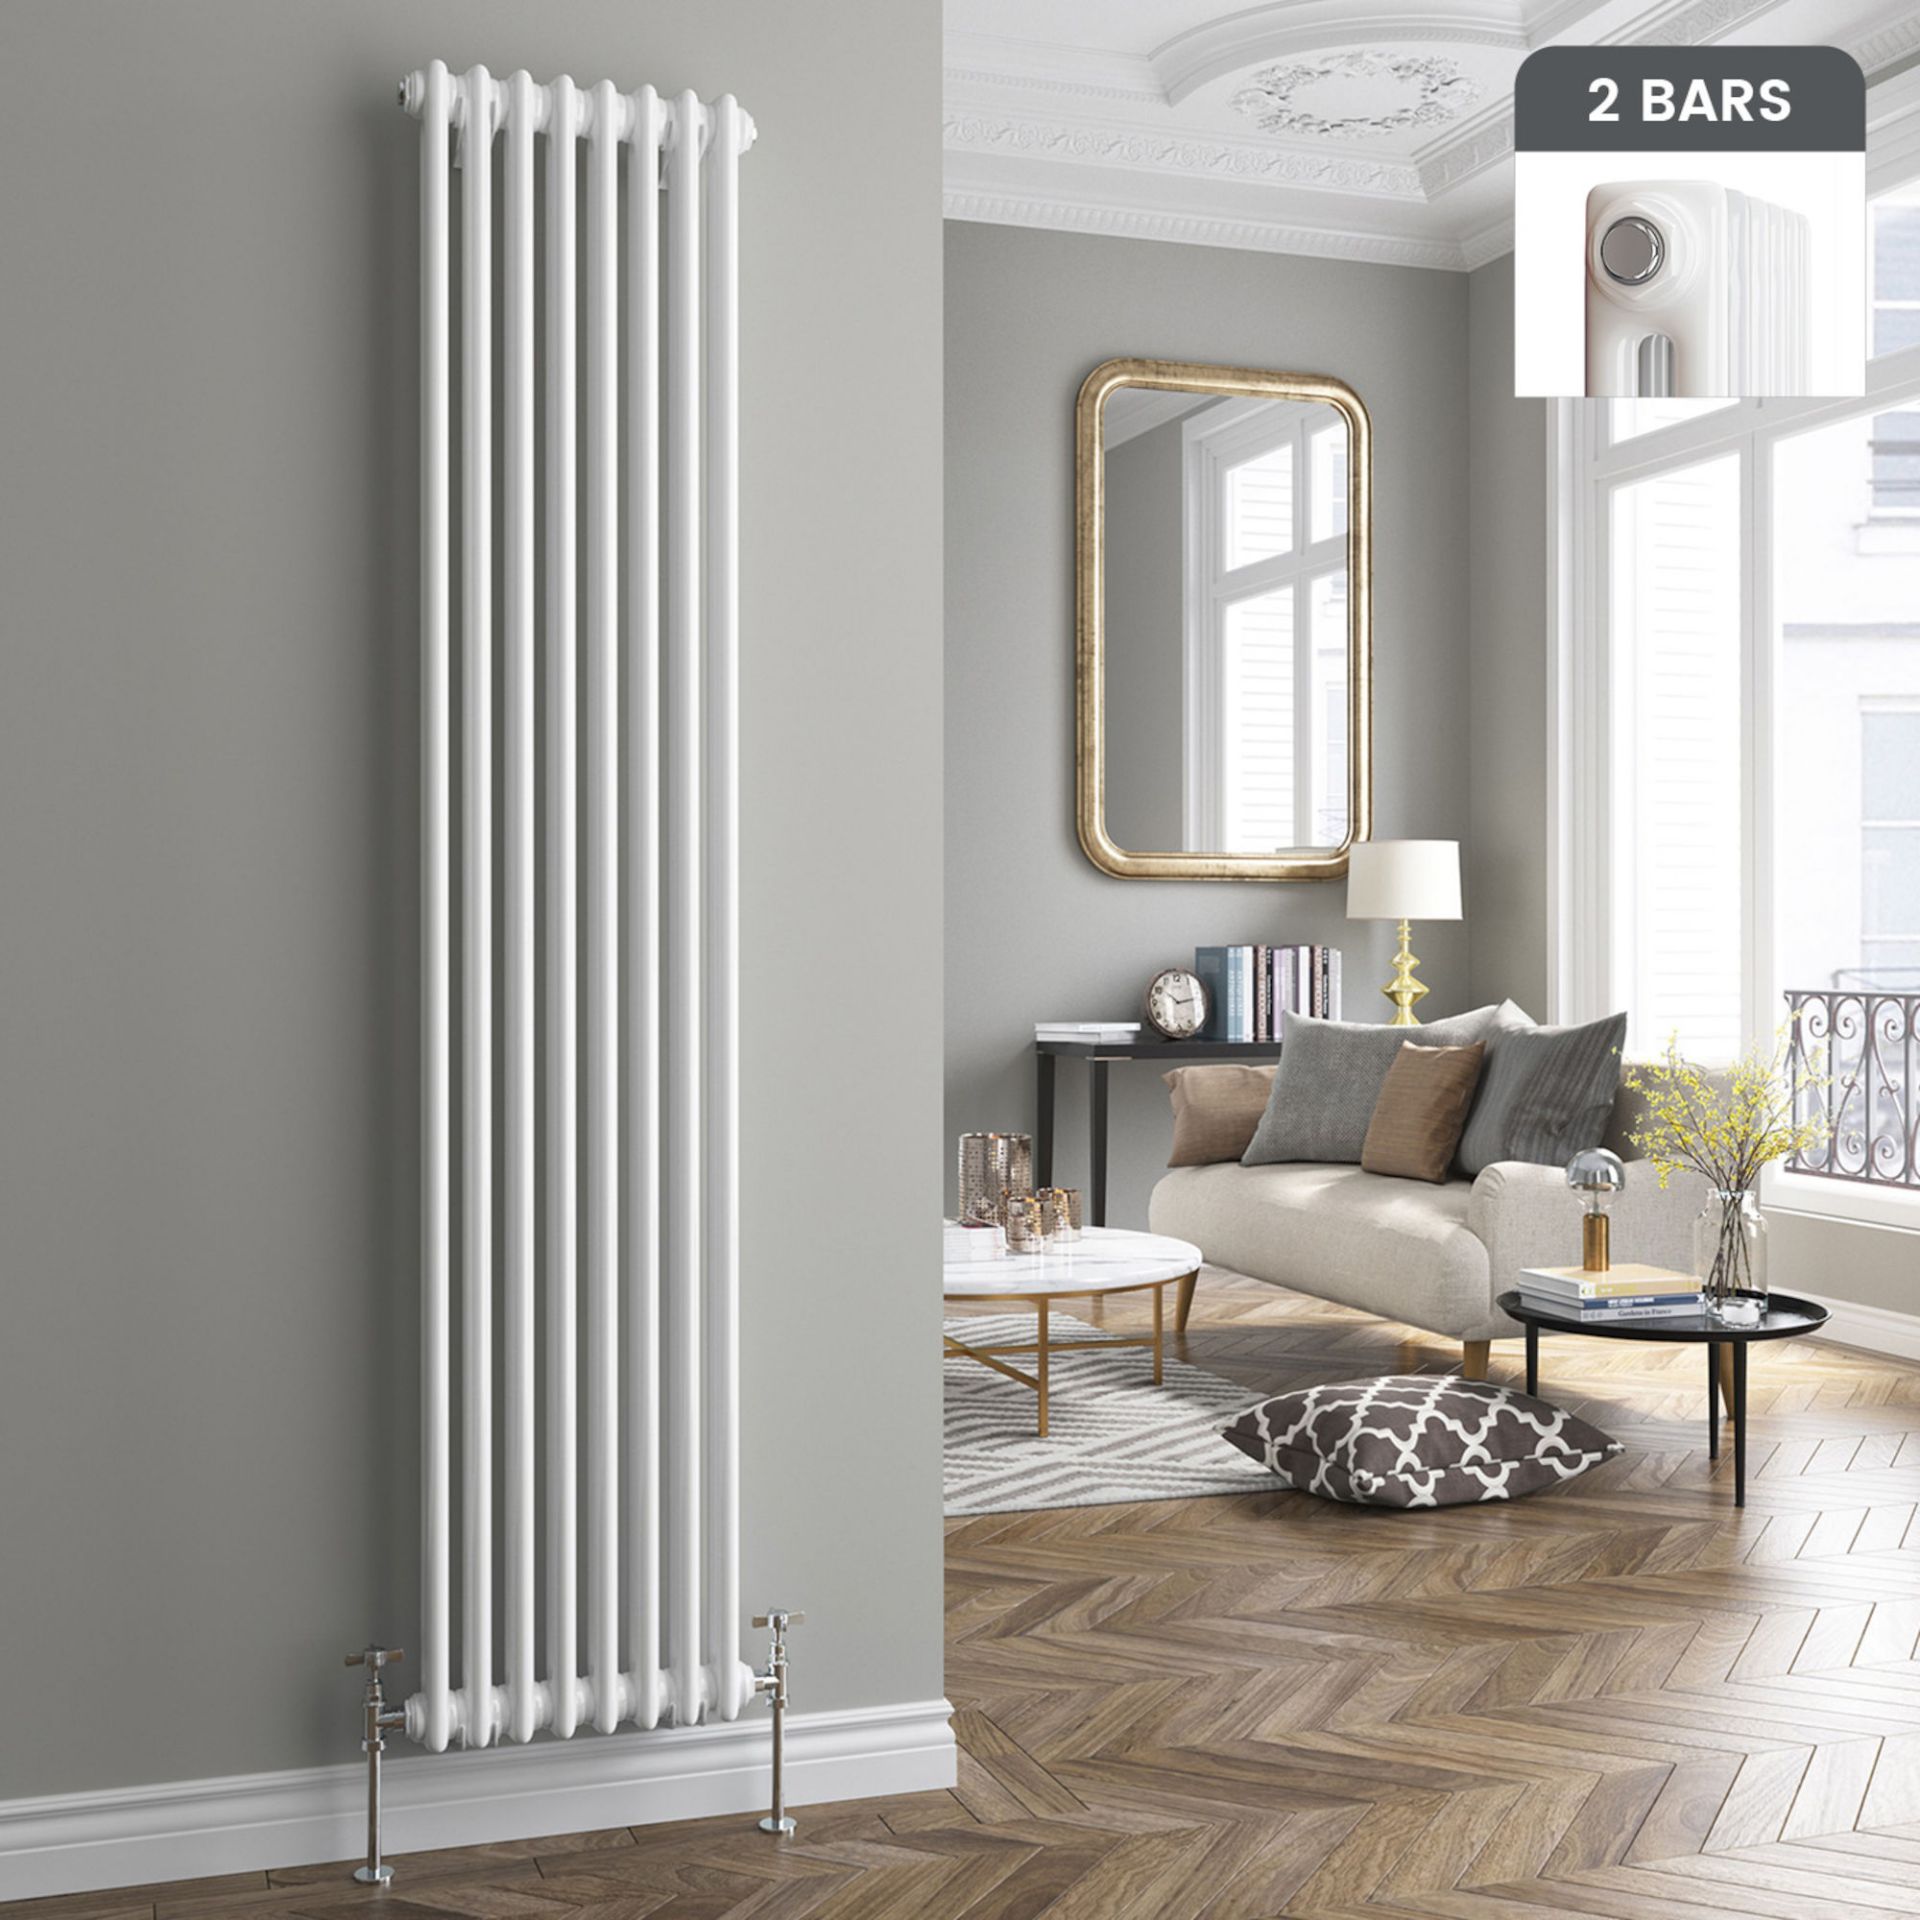 (OS206) 1800x380mm White Double Panel Vertical Colosseum Traditional Radiator. RRP £449.99. Made